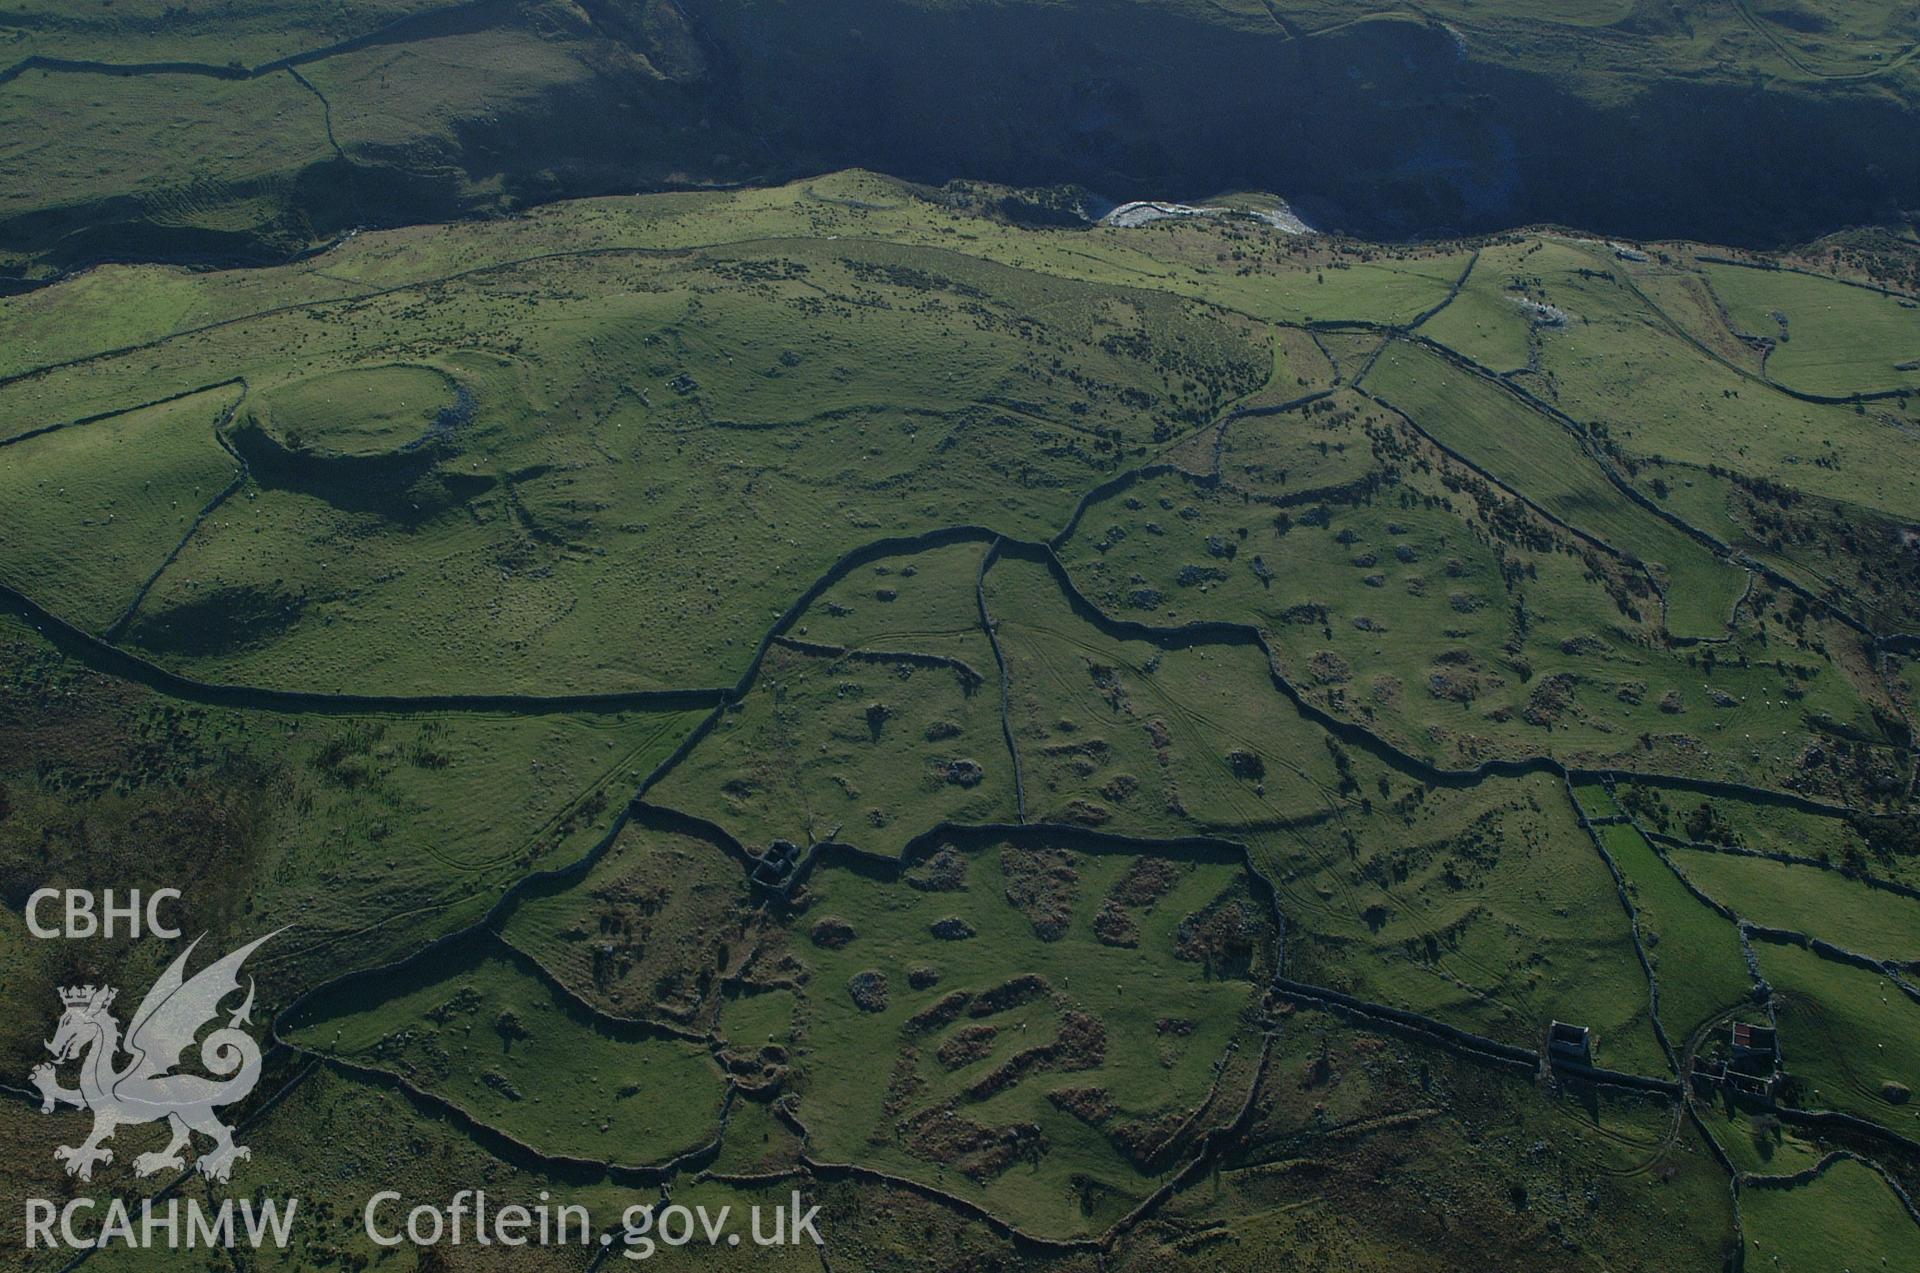 RCAHMW colour oblique aerial photograph of Pen-y-dinas taken on 24/01/2005 by Toby Driver